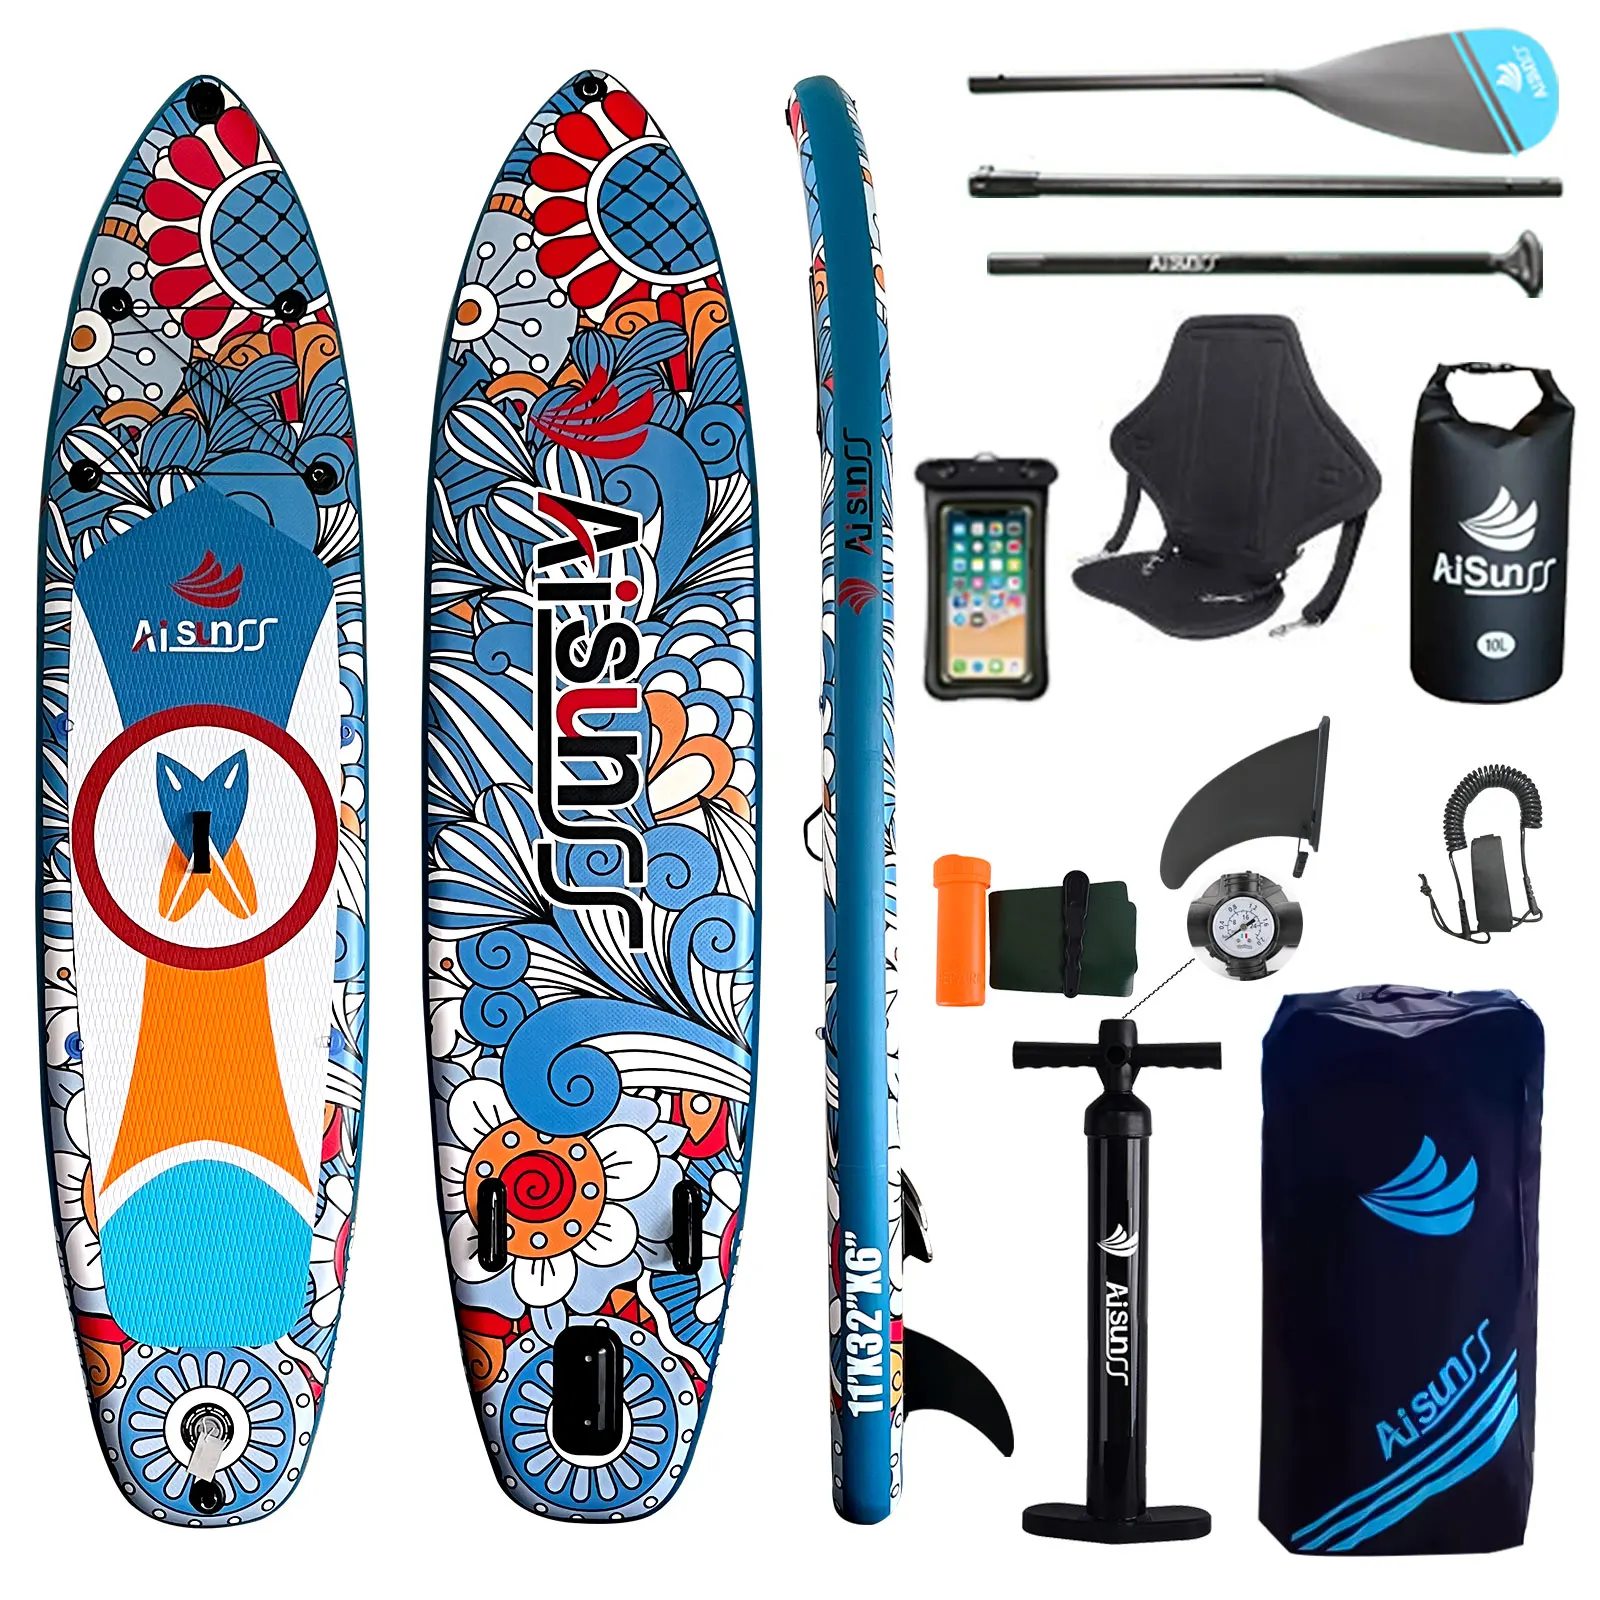 

11'（335cm）Inflatable Stand Up Paddle Board Sup Board сапборд сап борд сабборд доска для серфинга Surfboard for Yoga